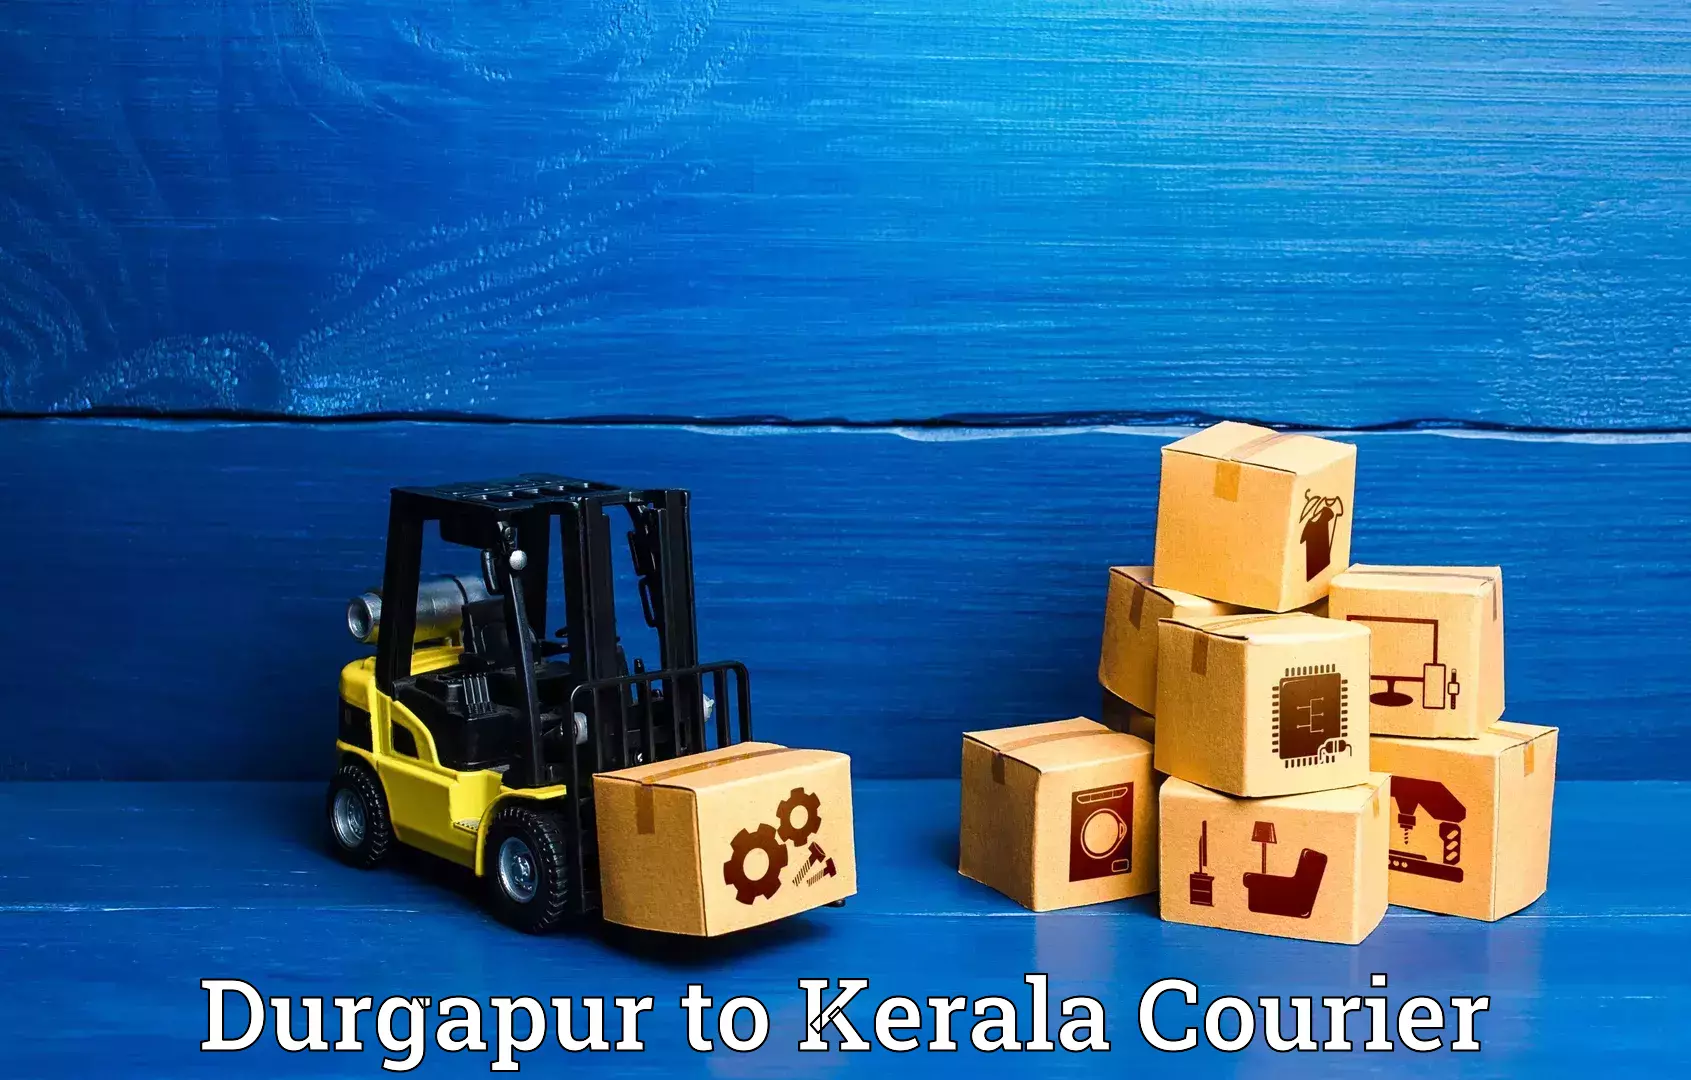 Luggage delivery network Durgapur to Angamaly